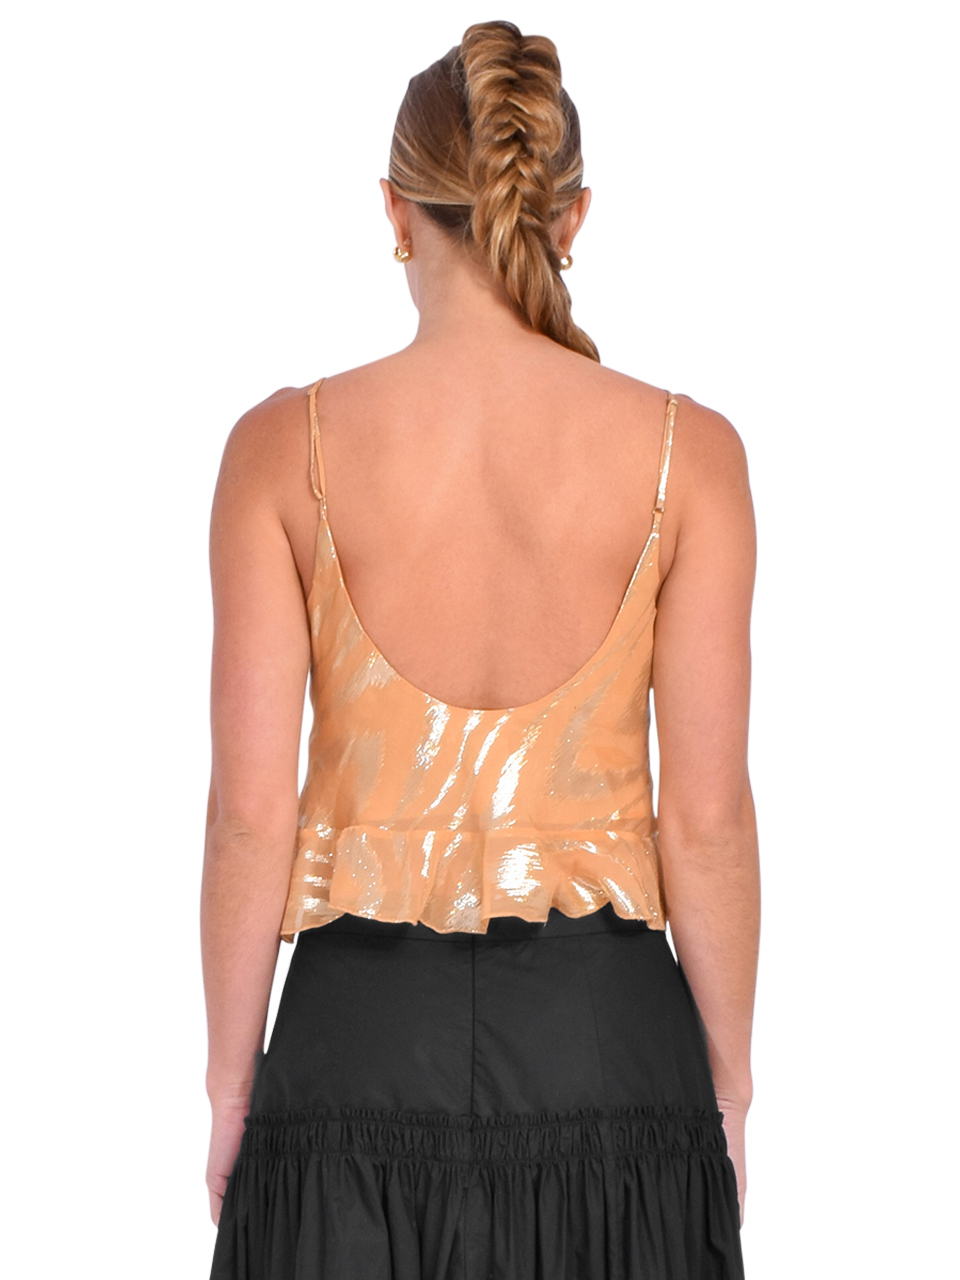 DELFI Anya Top in Nude/Gold Back View 